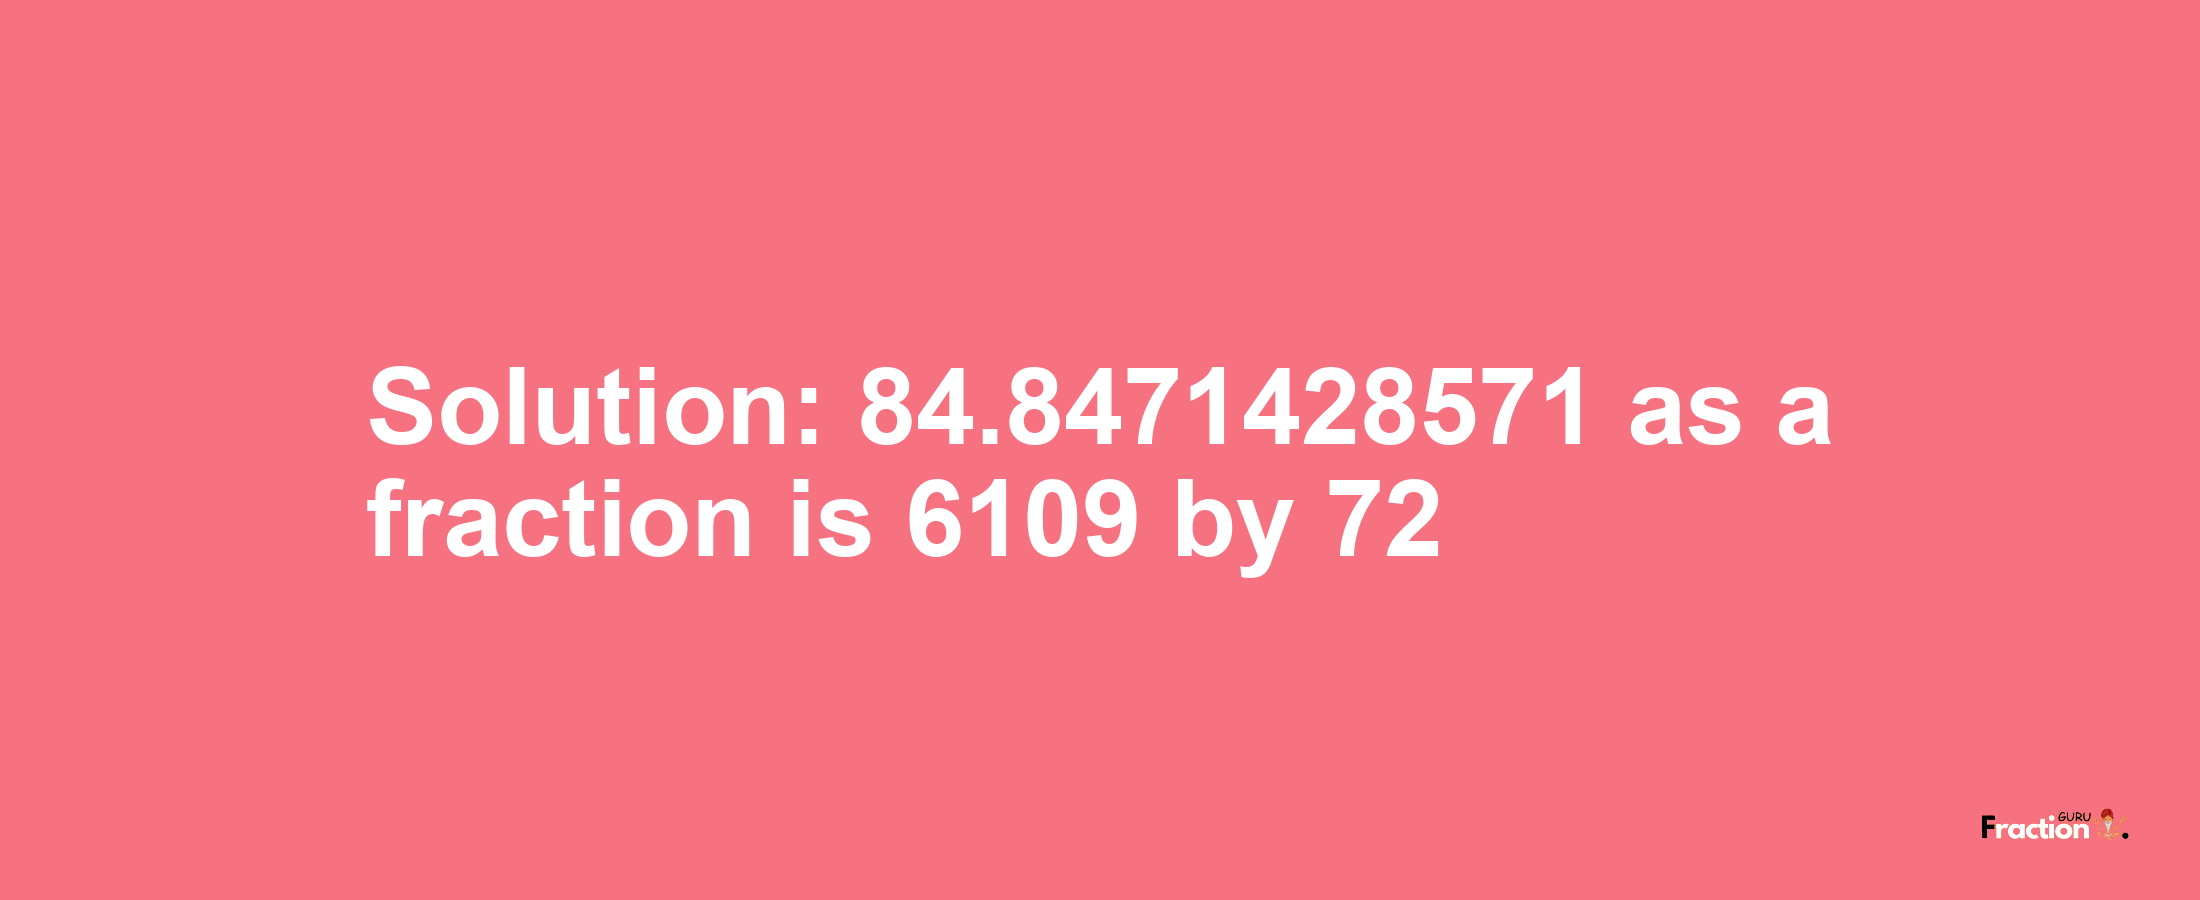 Solution:84.8471428571 as a fraction is 6109/72